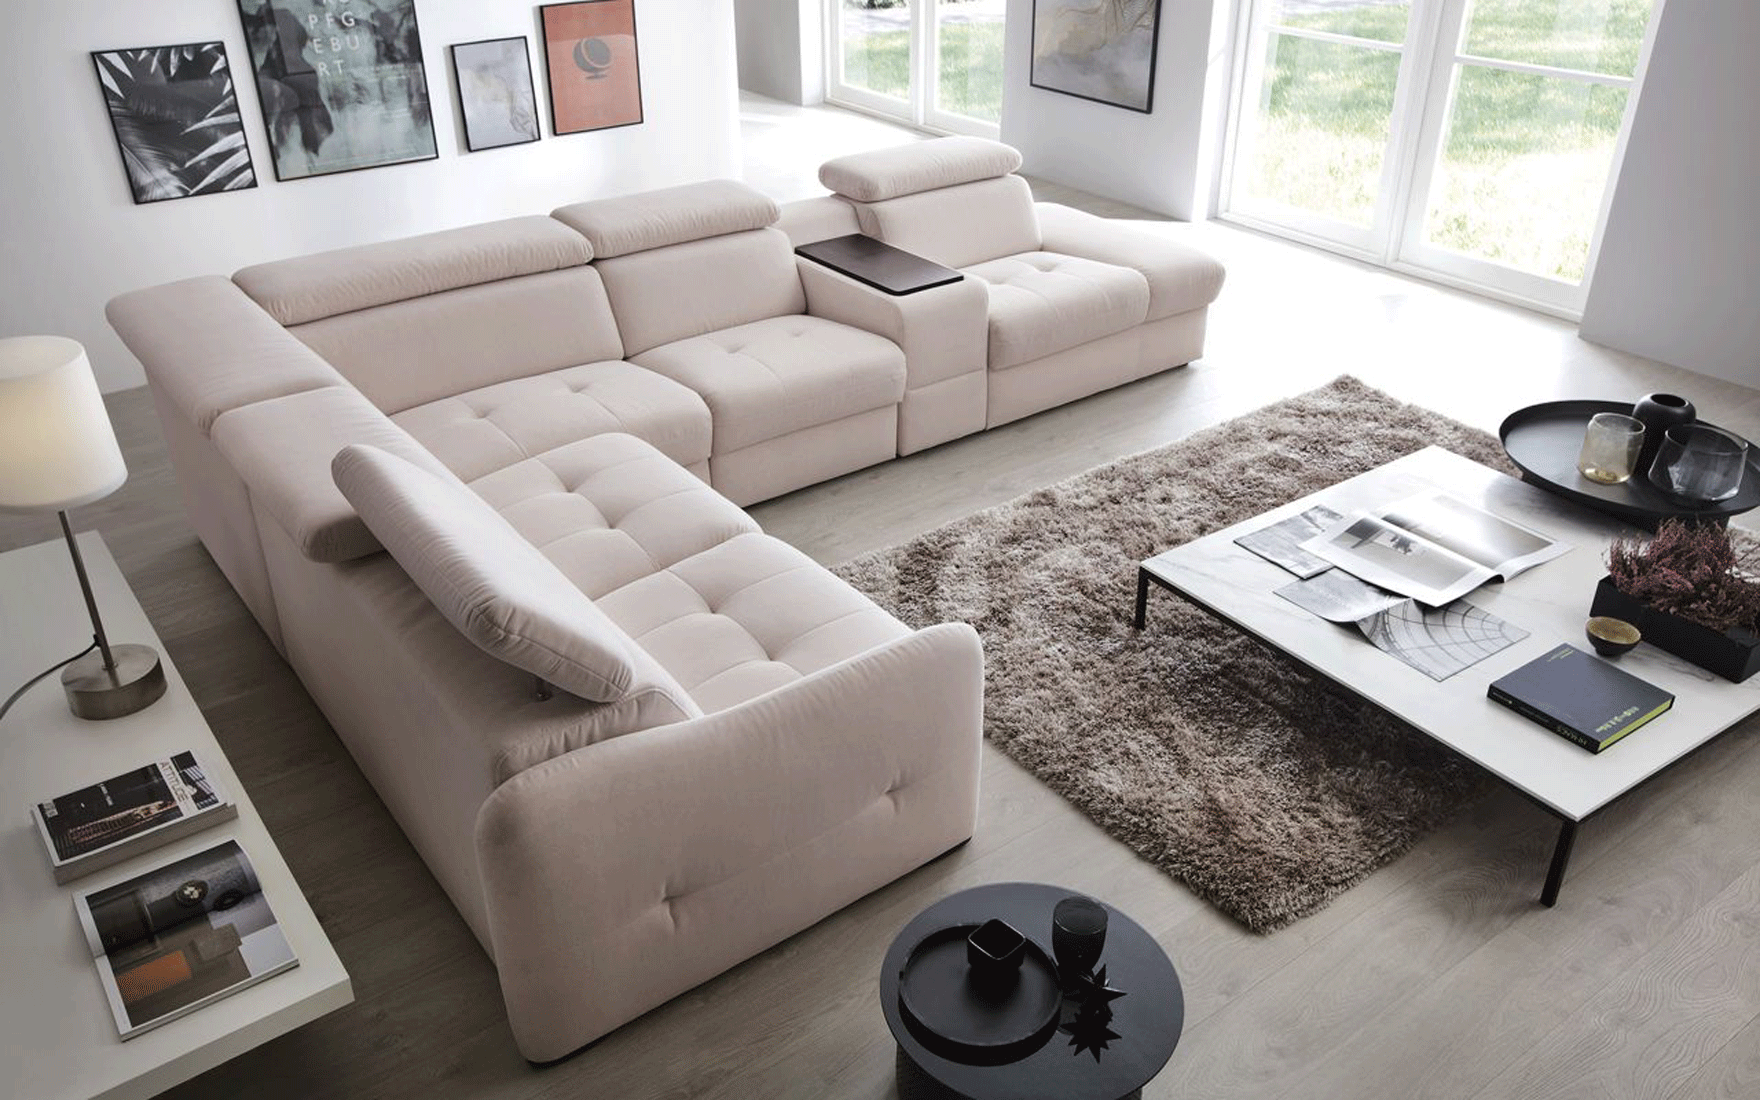 Living Room Furniture Reclining and Sliding Seats Sets Domani Sectional w/Recliner, storage